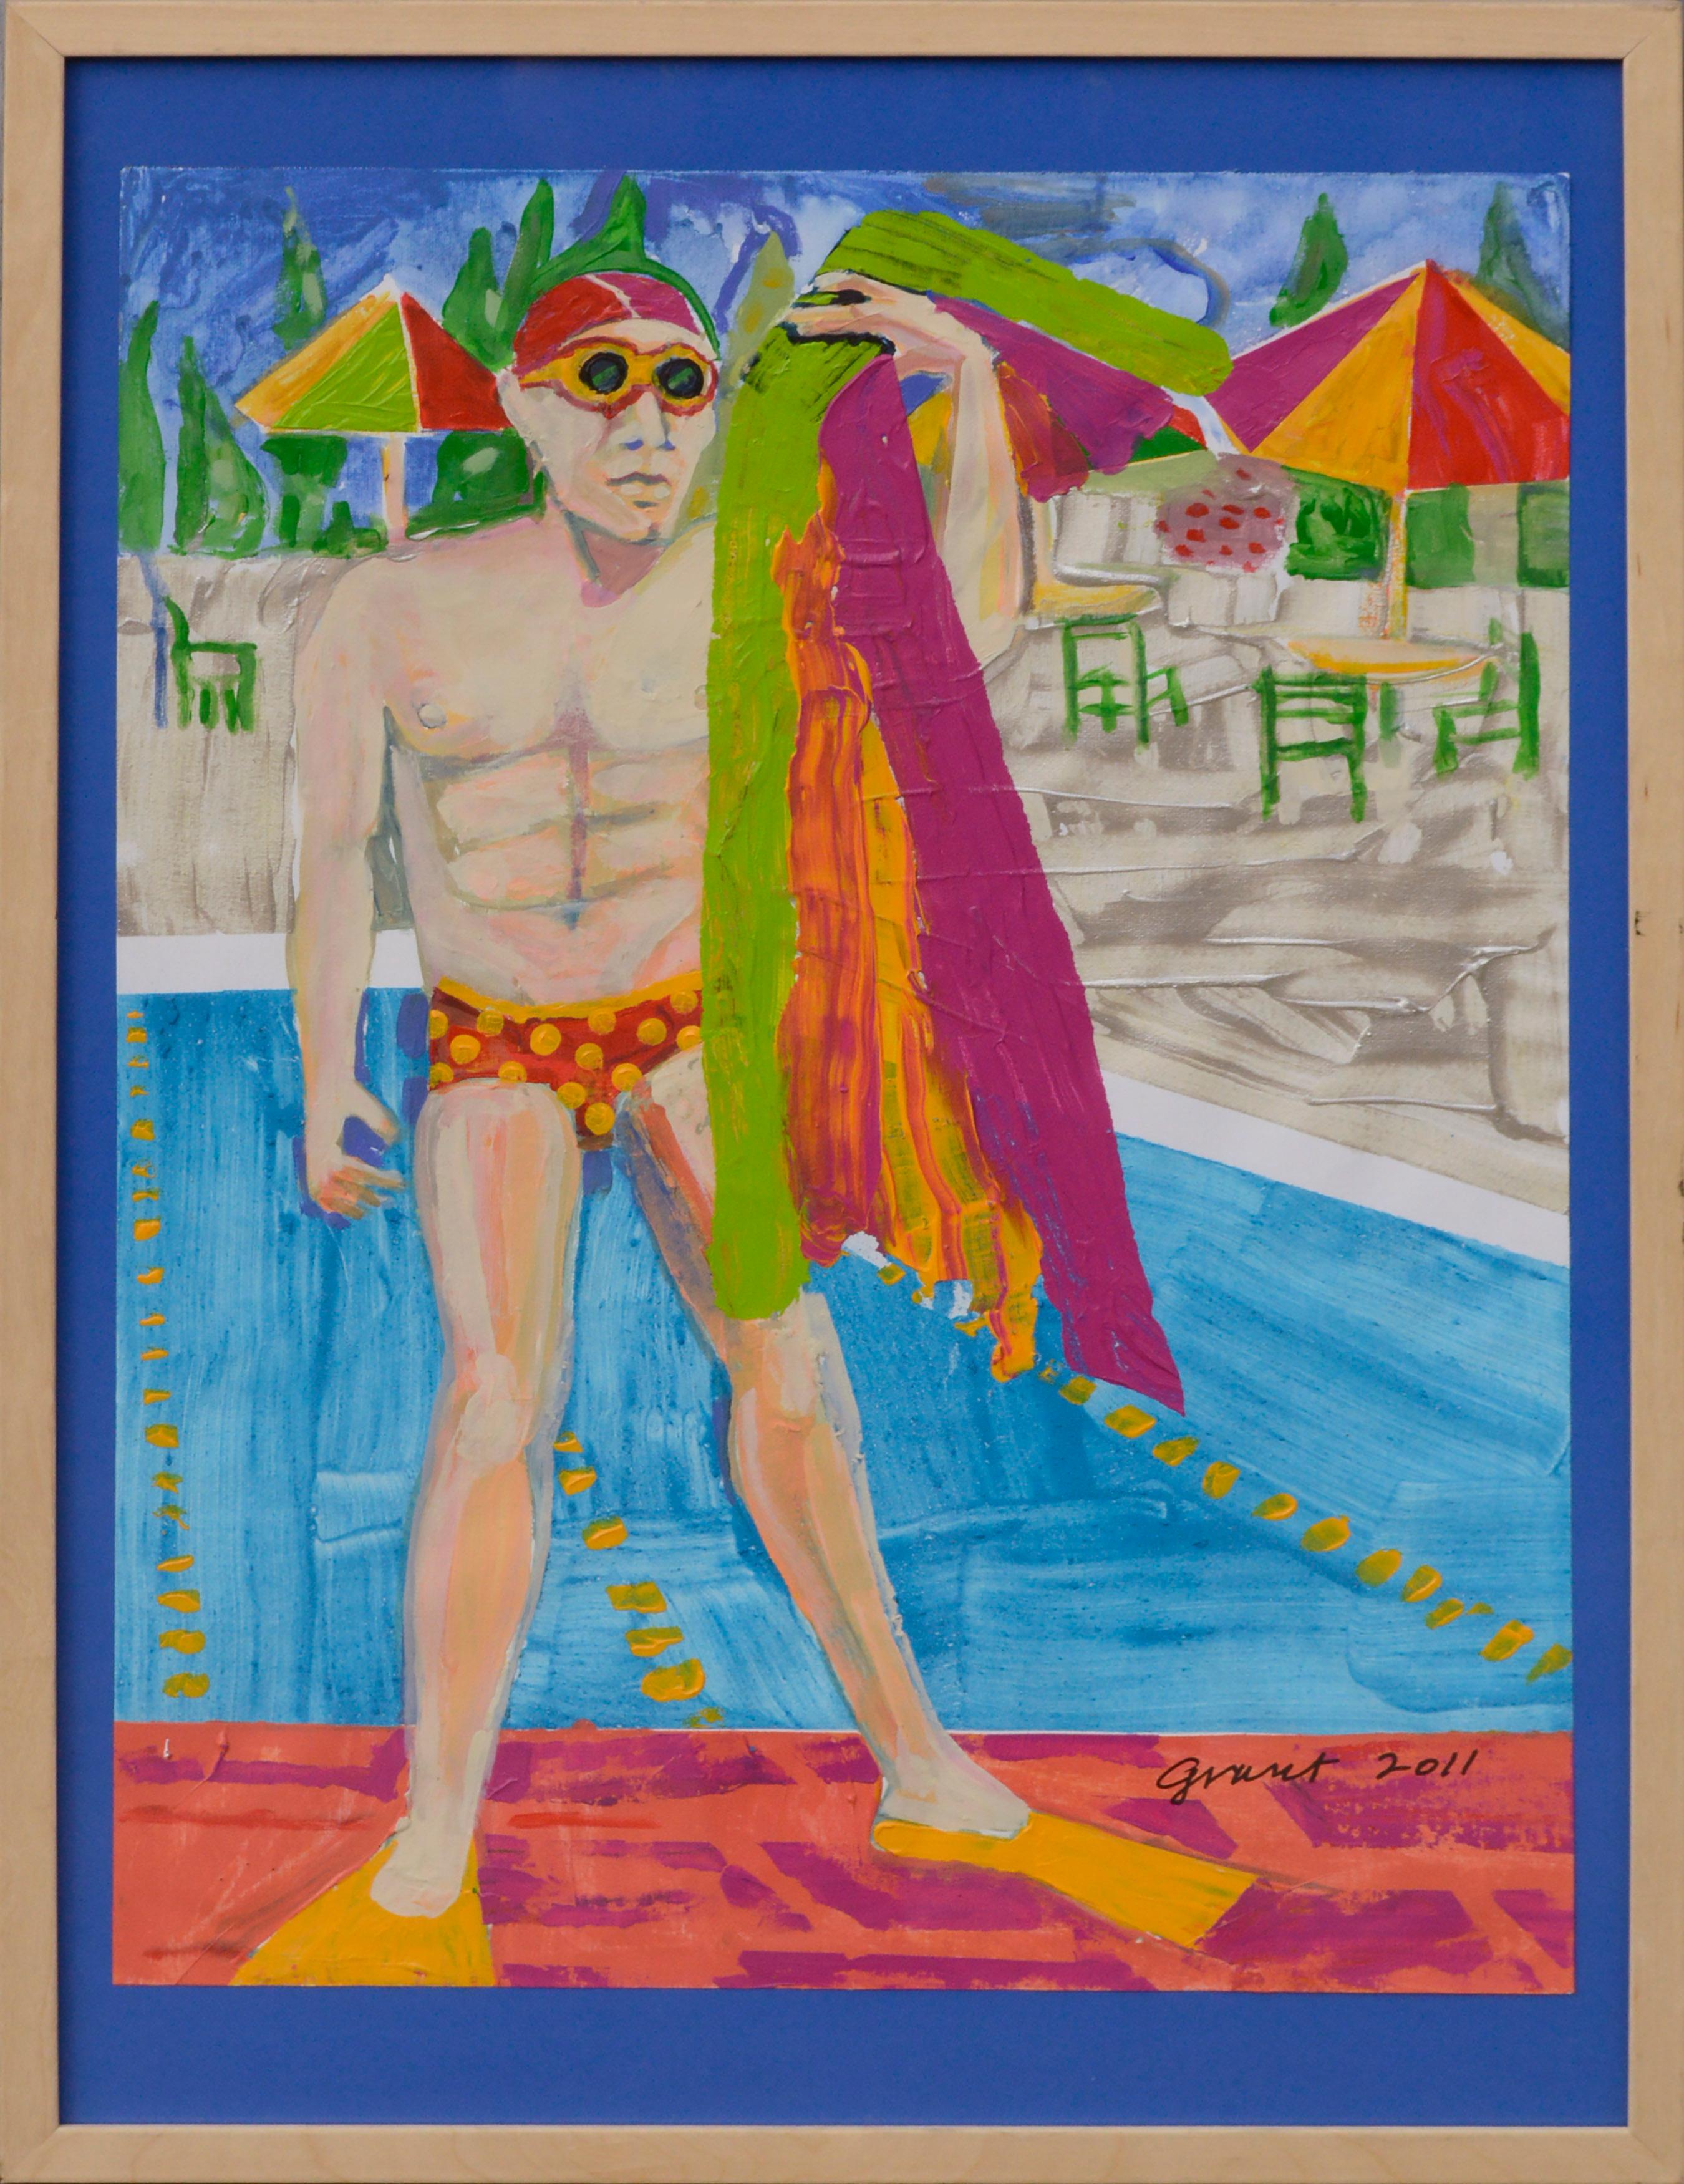 Marc Foster Grant Landscape Painting - "Towel Man" Figurative Abstract Poolside Swimmer, Aqua Culture Series 